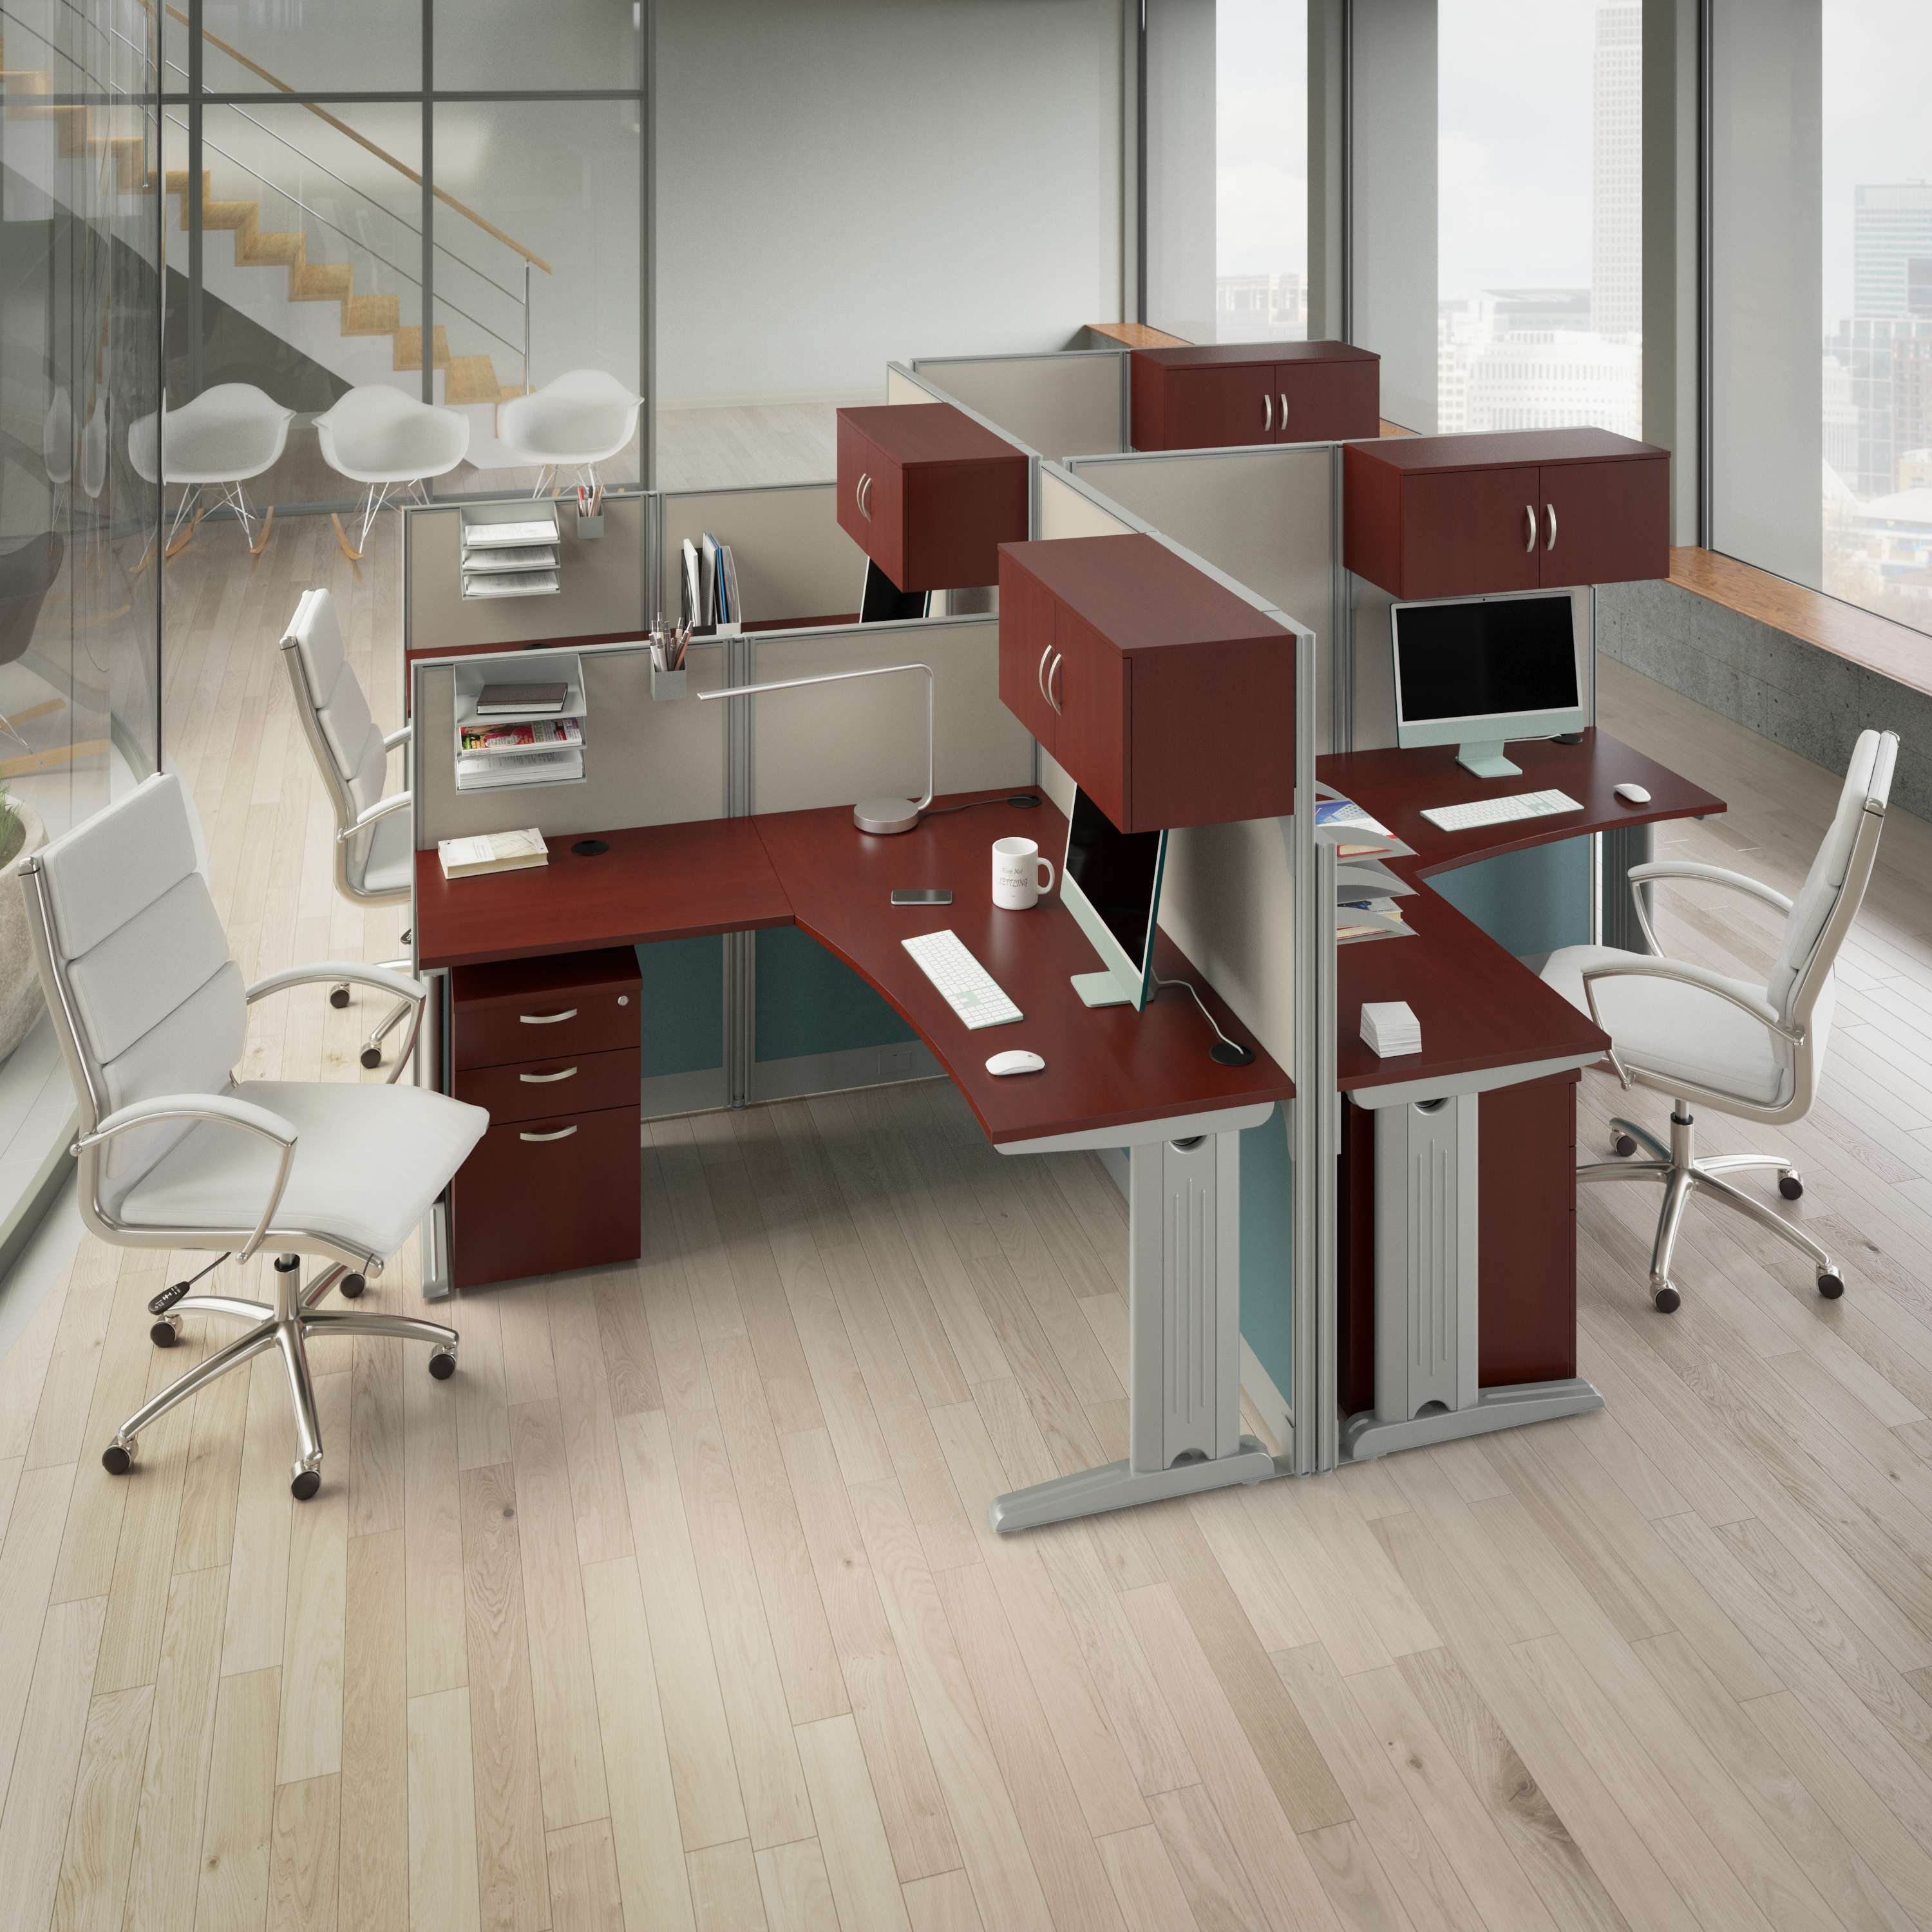 Shop Bush Business Furniture Office in an Hour Cubicle Storage with Cabinet, Drawers, Paper Tray, and Pencil Holder 08 WC36490-03K #color_hansen cherry